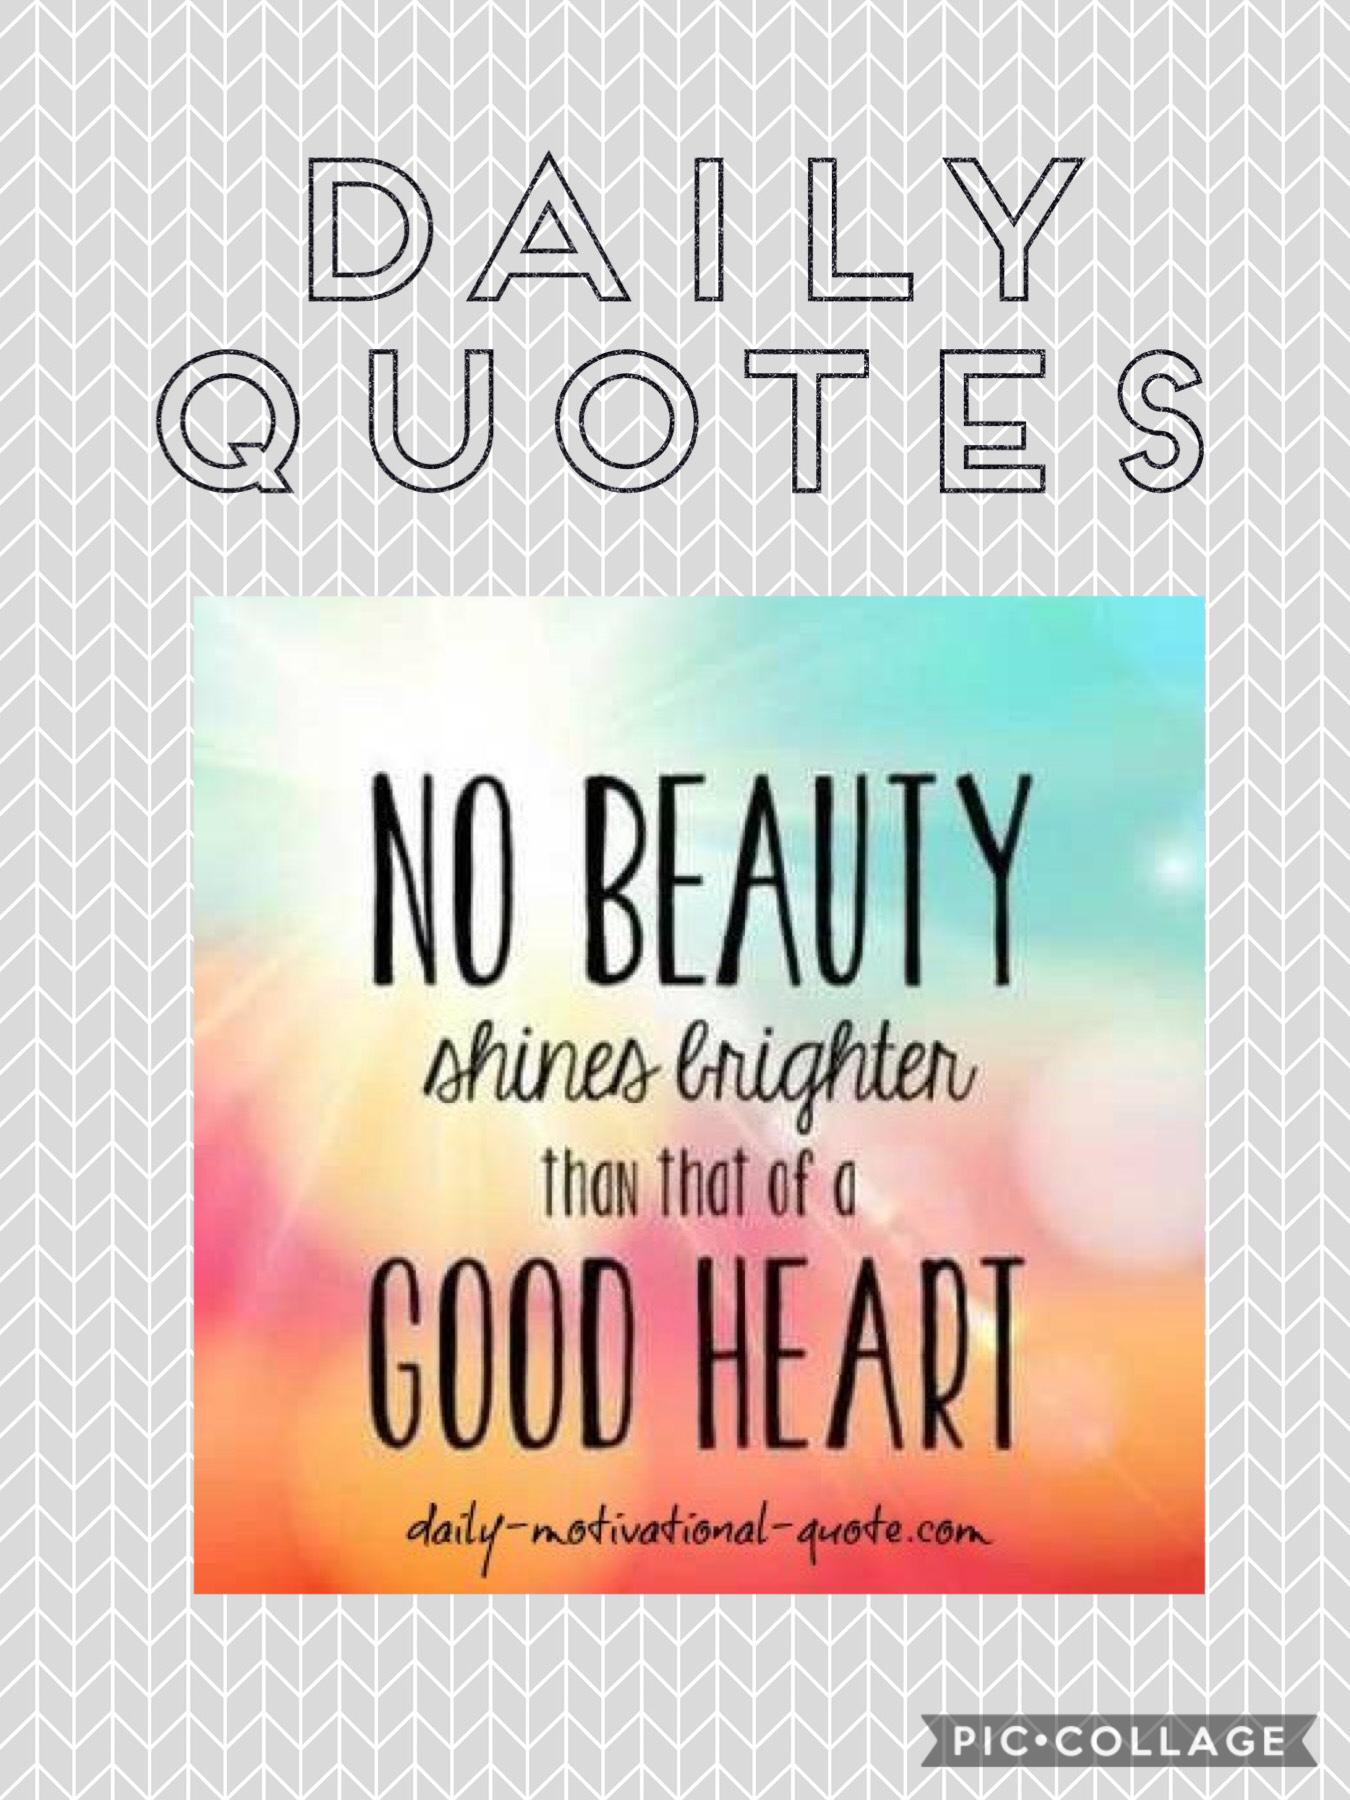 Like my daily quotes.❤️